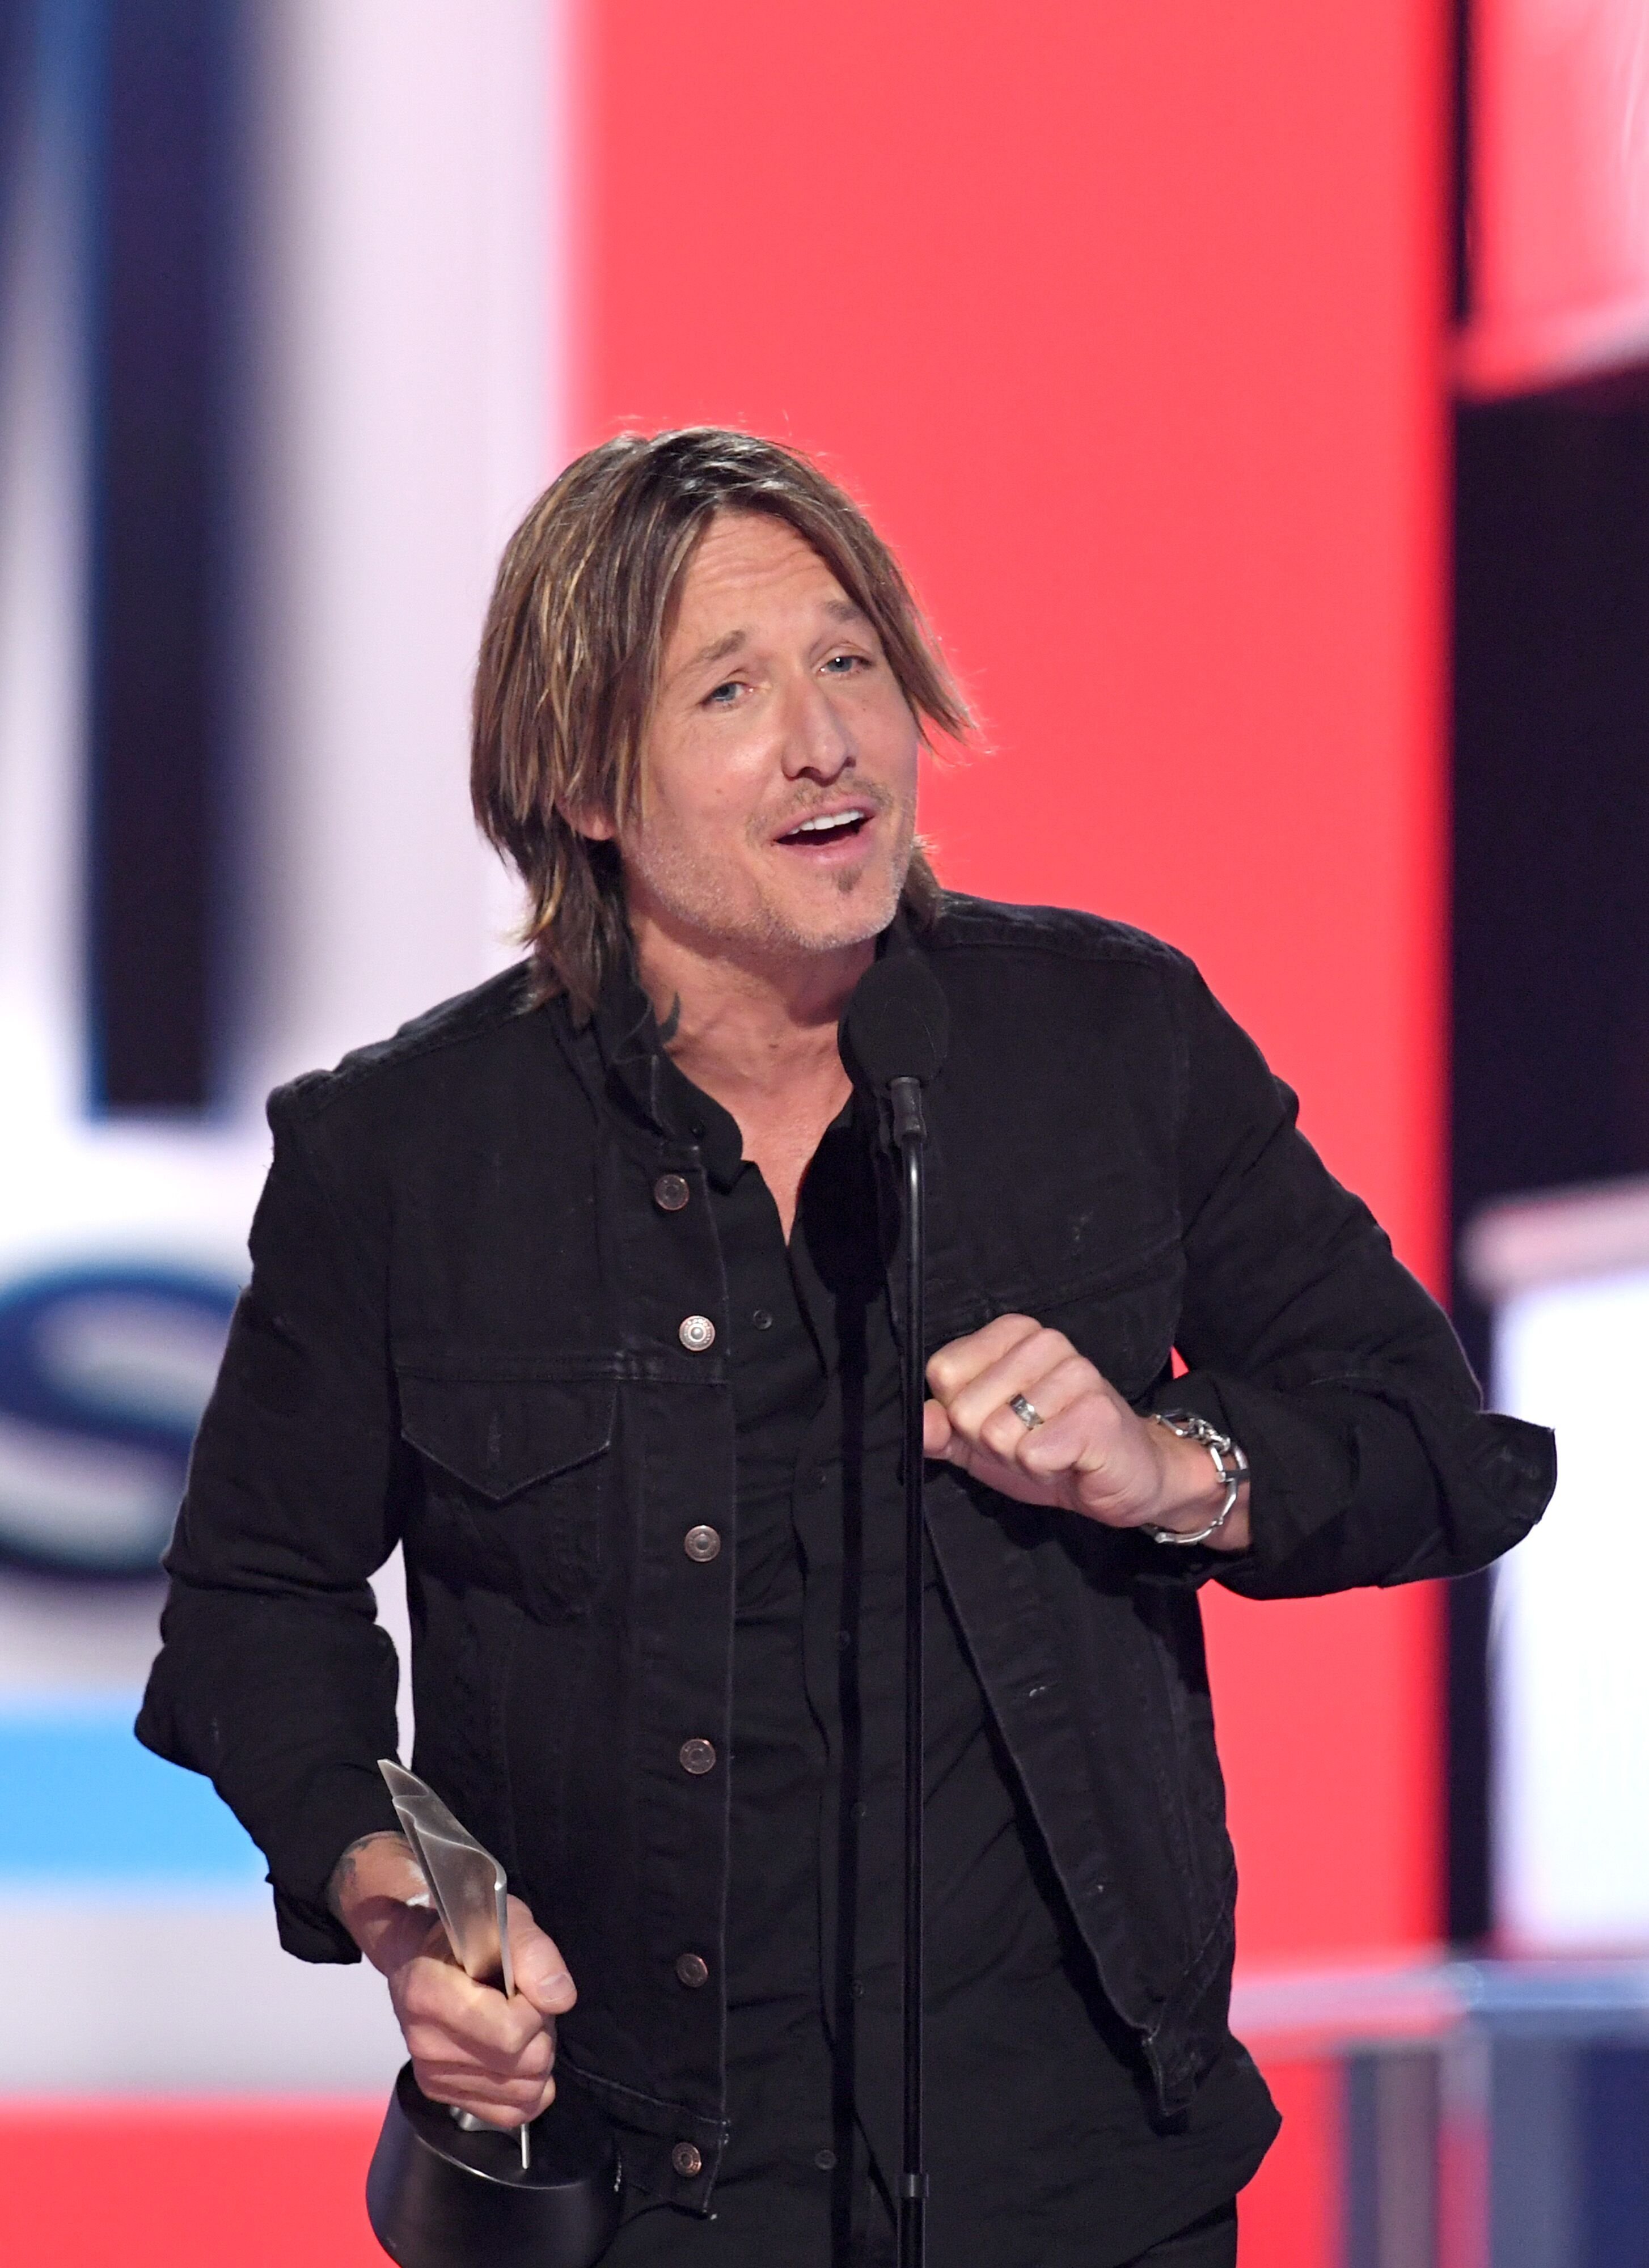 Keith Urban at the 54th Academy Of Country Music Awards on April 07, 2019, in Las Vegas, Nevada | Photo: Kevin Winter/Getty Images